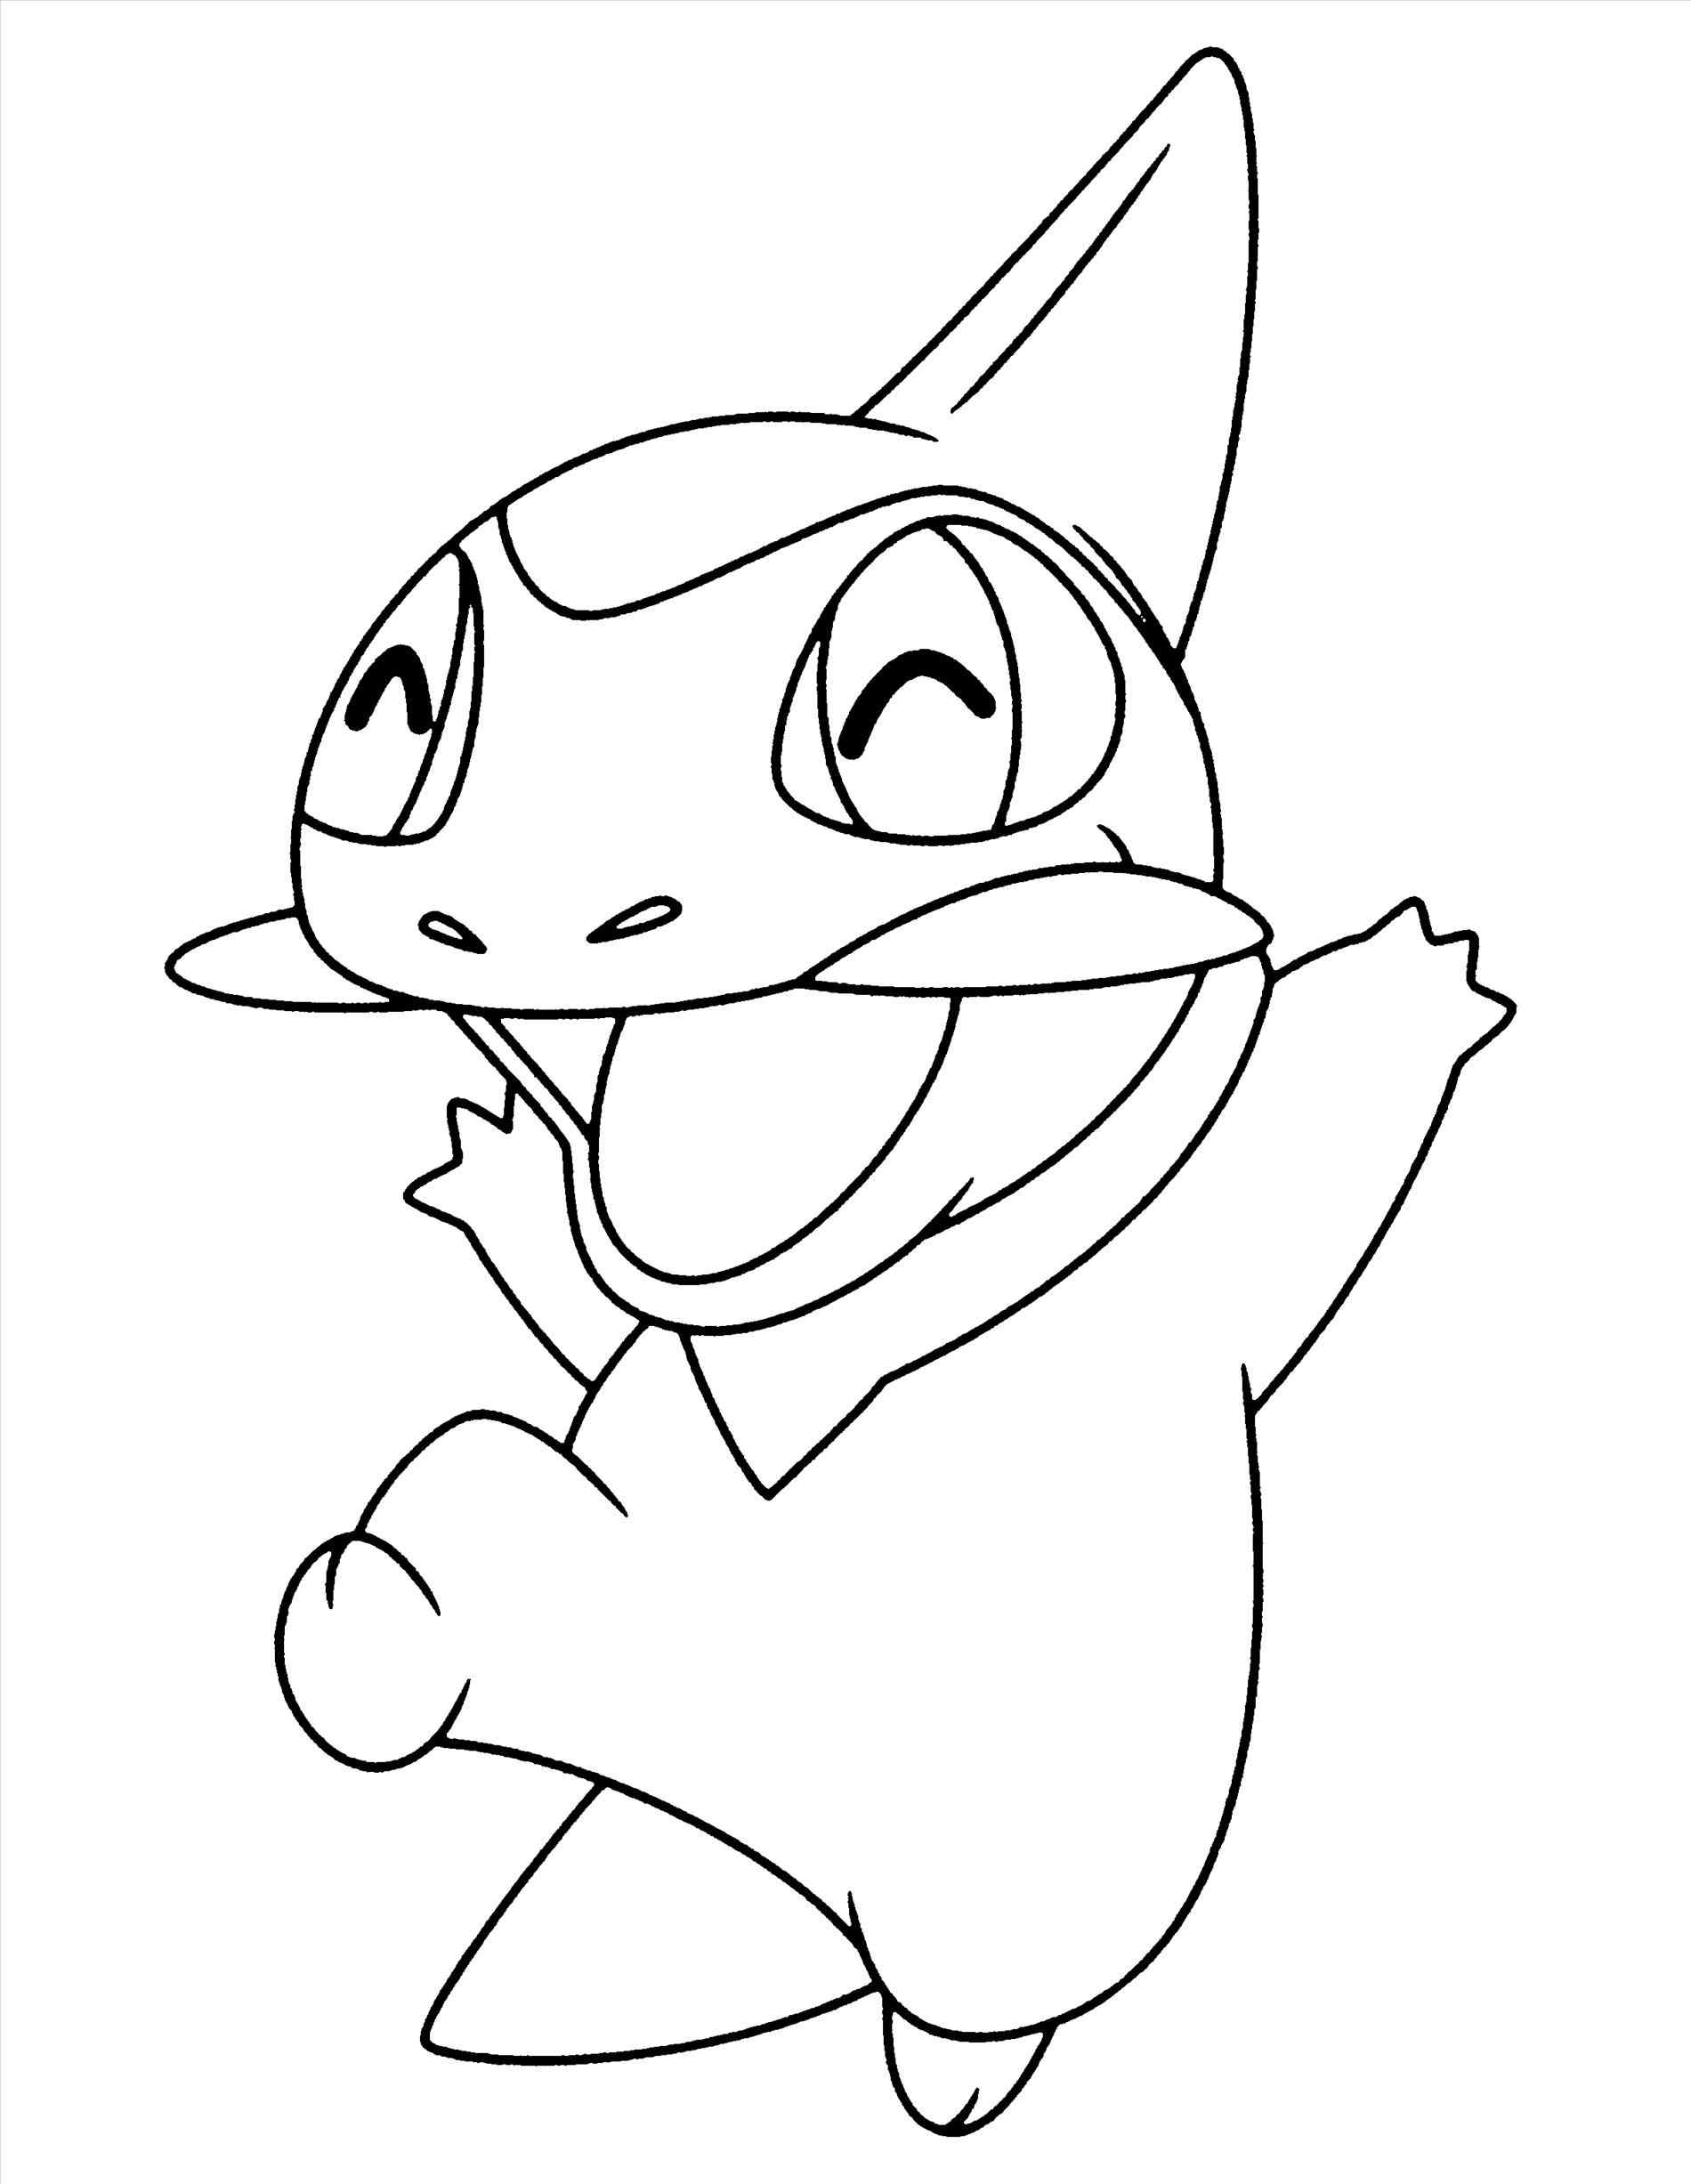 Leafeon Coloring Page at GetDrawings | Free download